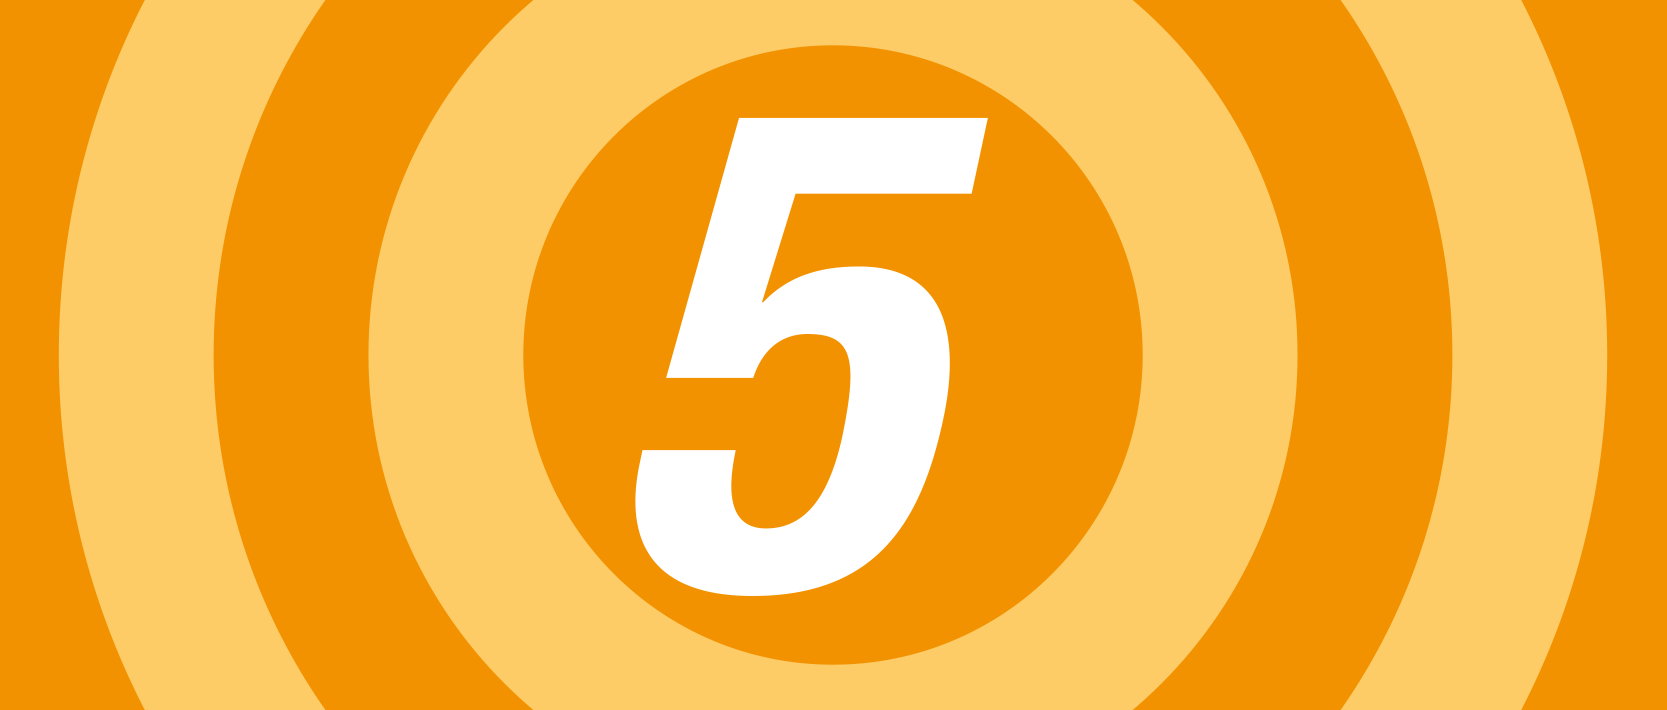 Image of a number 5